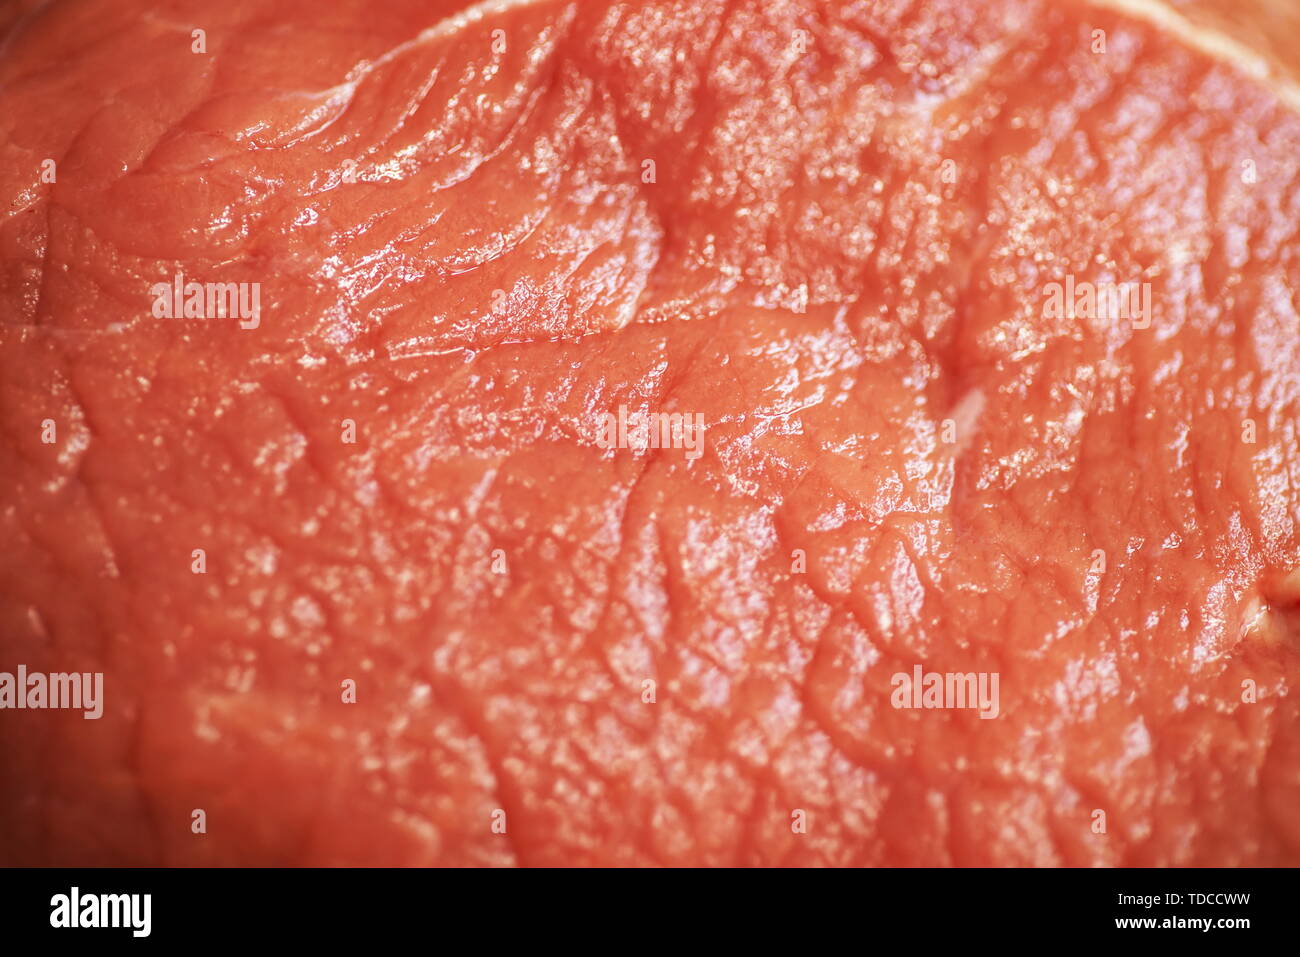 Fresh Raw Food Beef Meat Steak Texture, Beef Fillet Steaks on Cutting Board, Crude Meat Texture Stock Photo